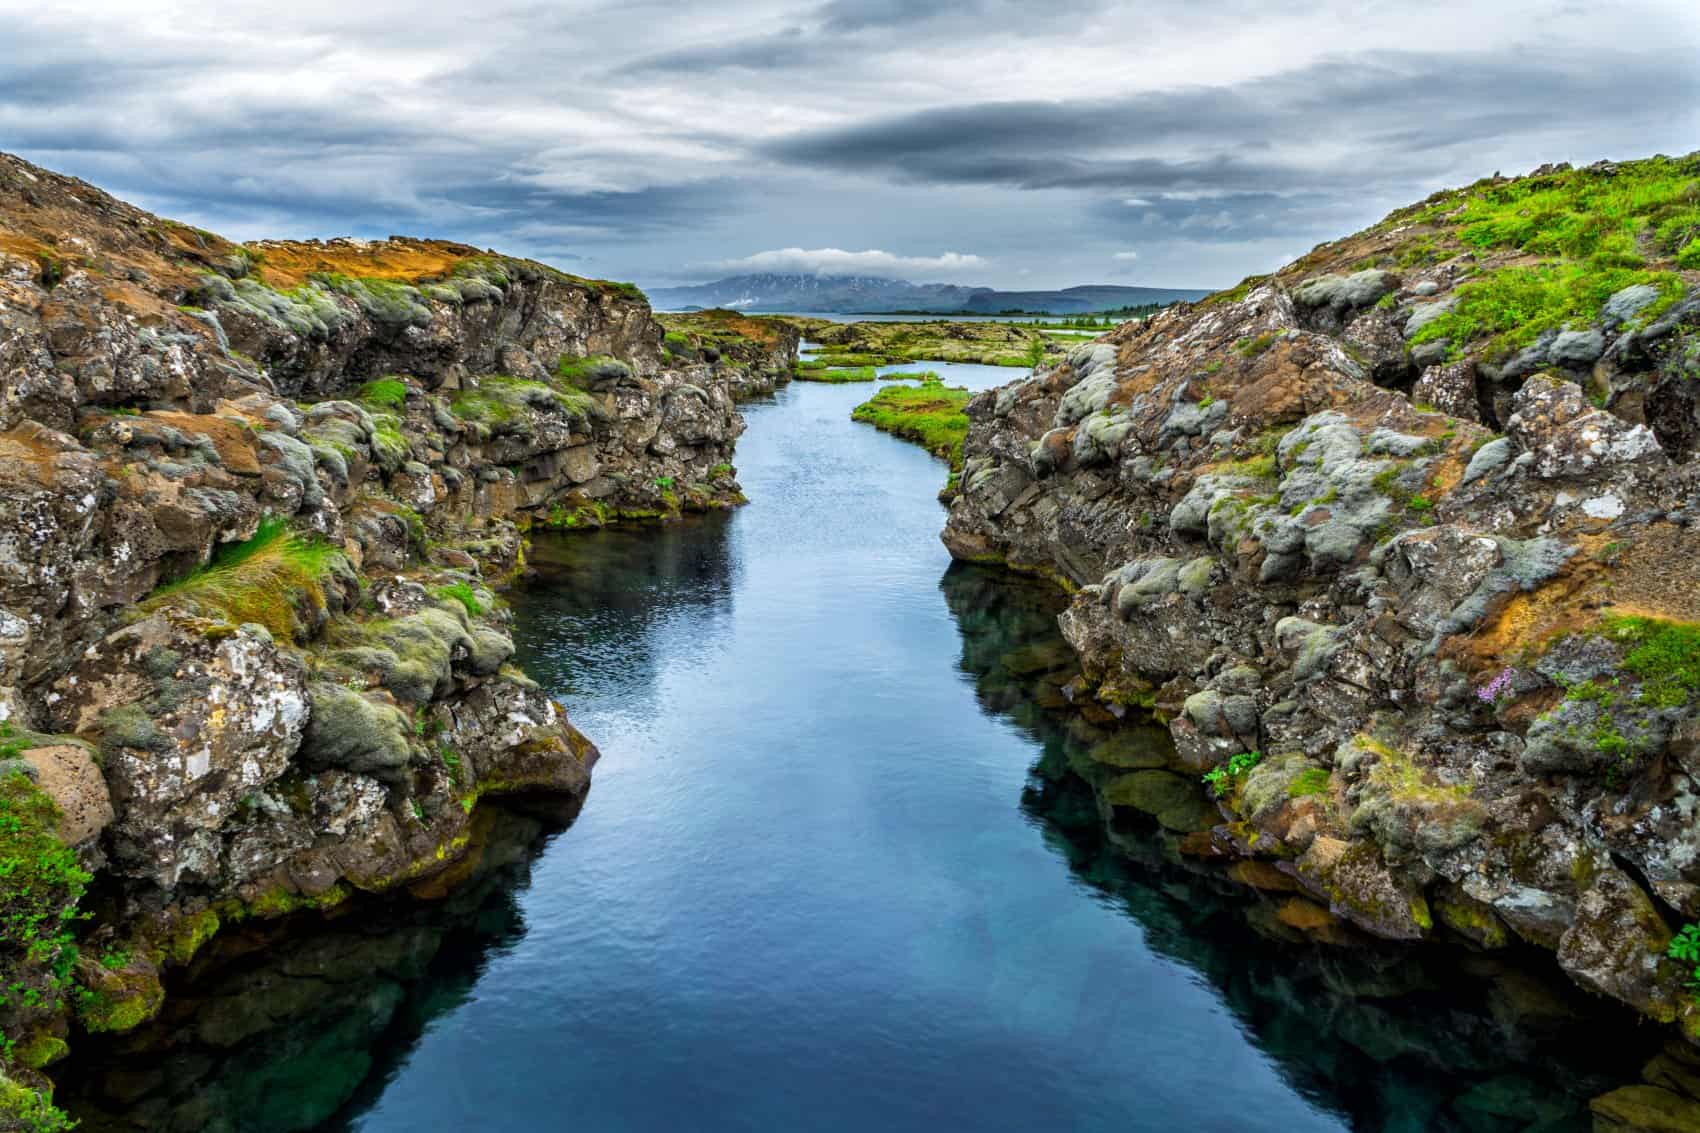 Diving the Silfra fissure in Iceland.